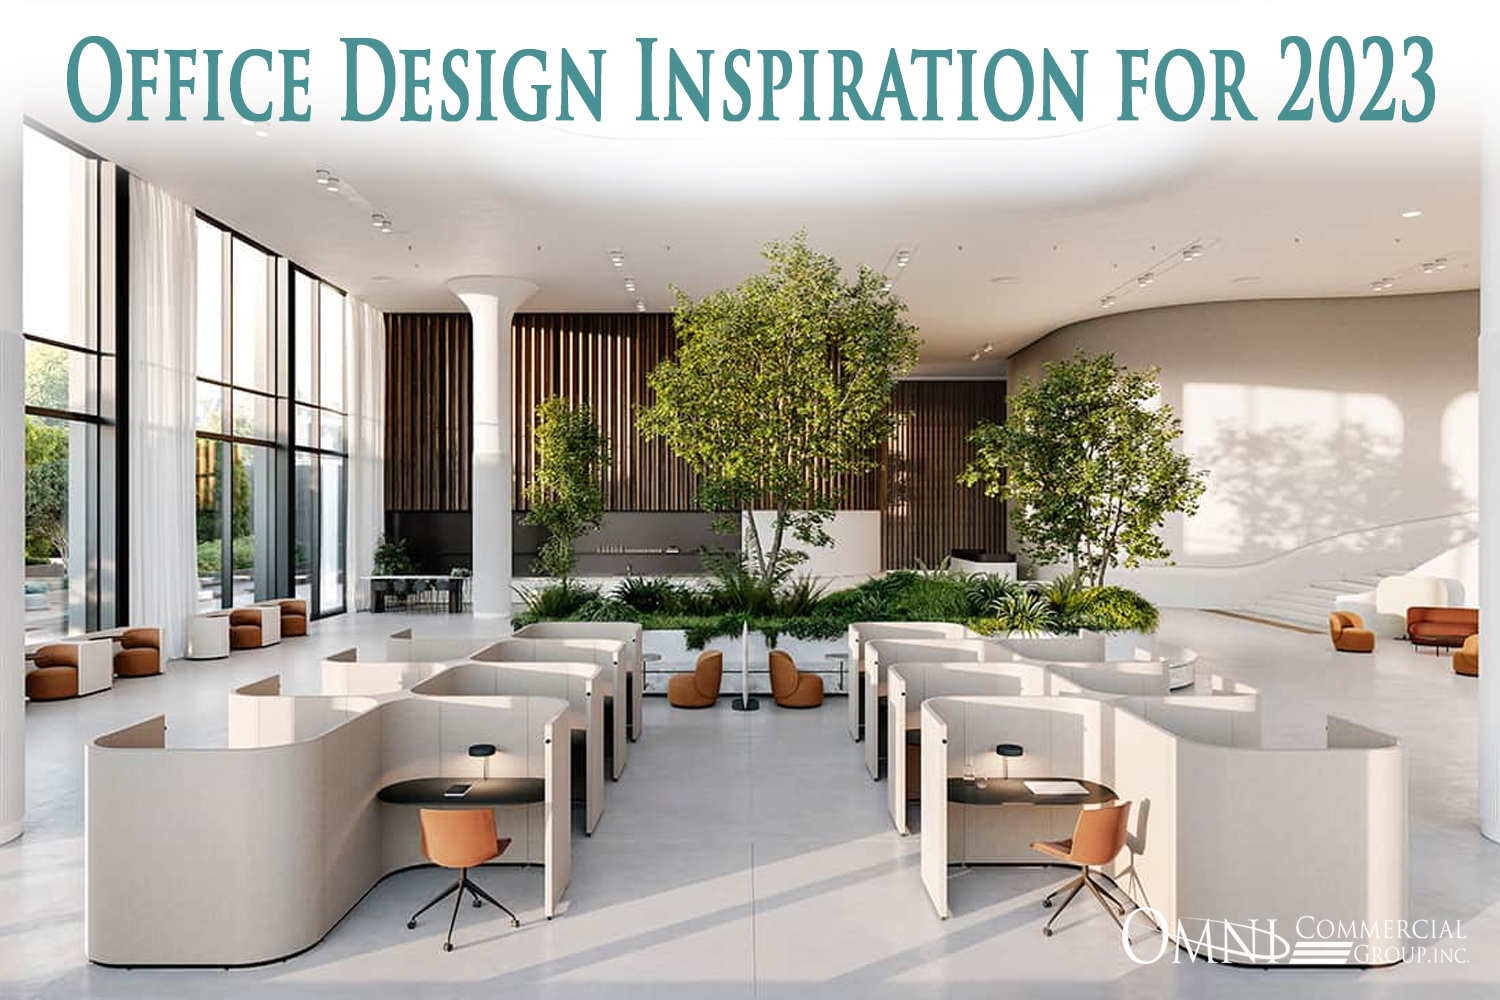 Office Design Inspiration for 2023 - Omni Commercial Group